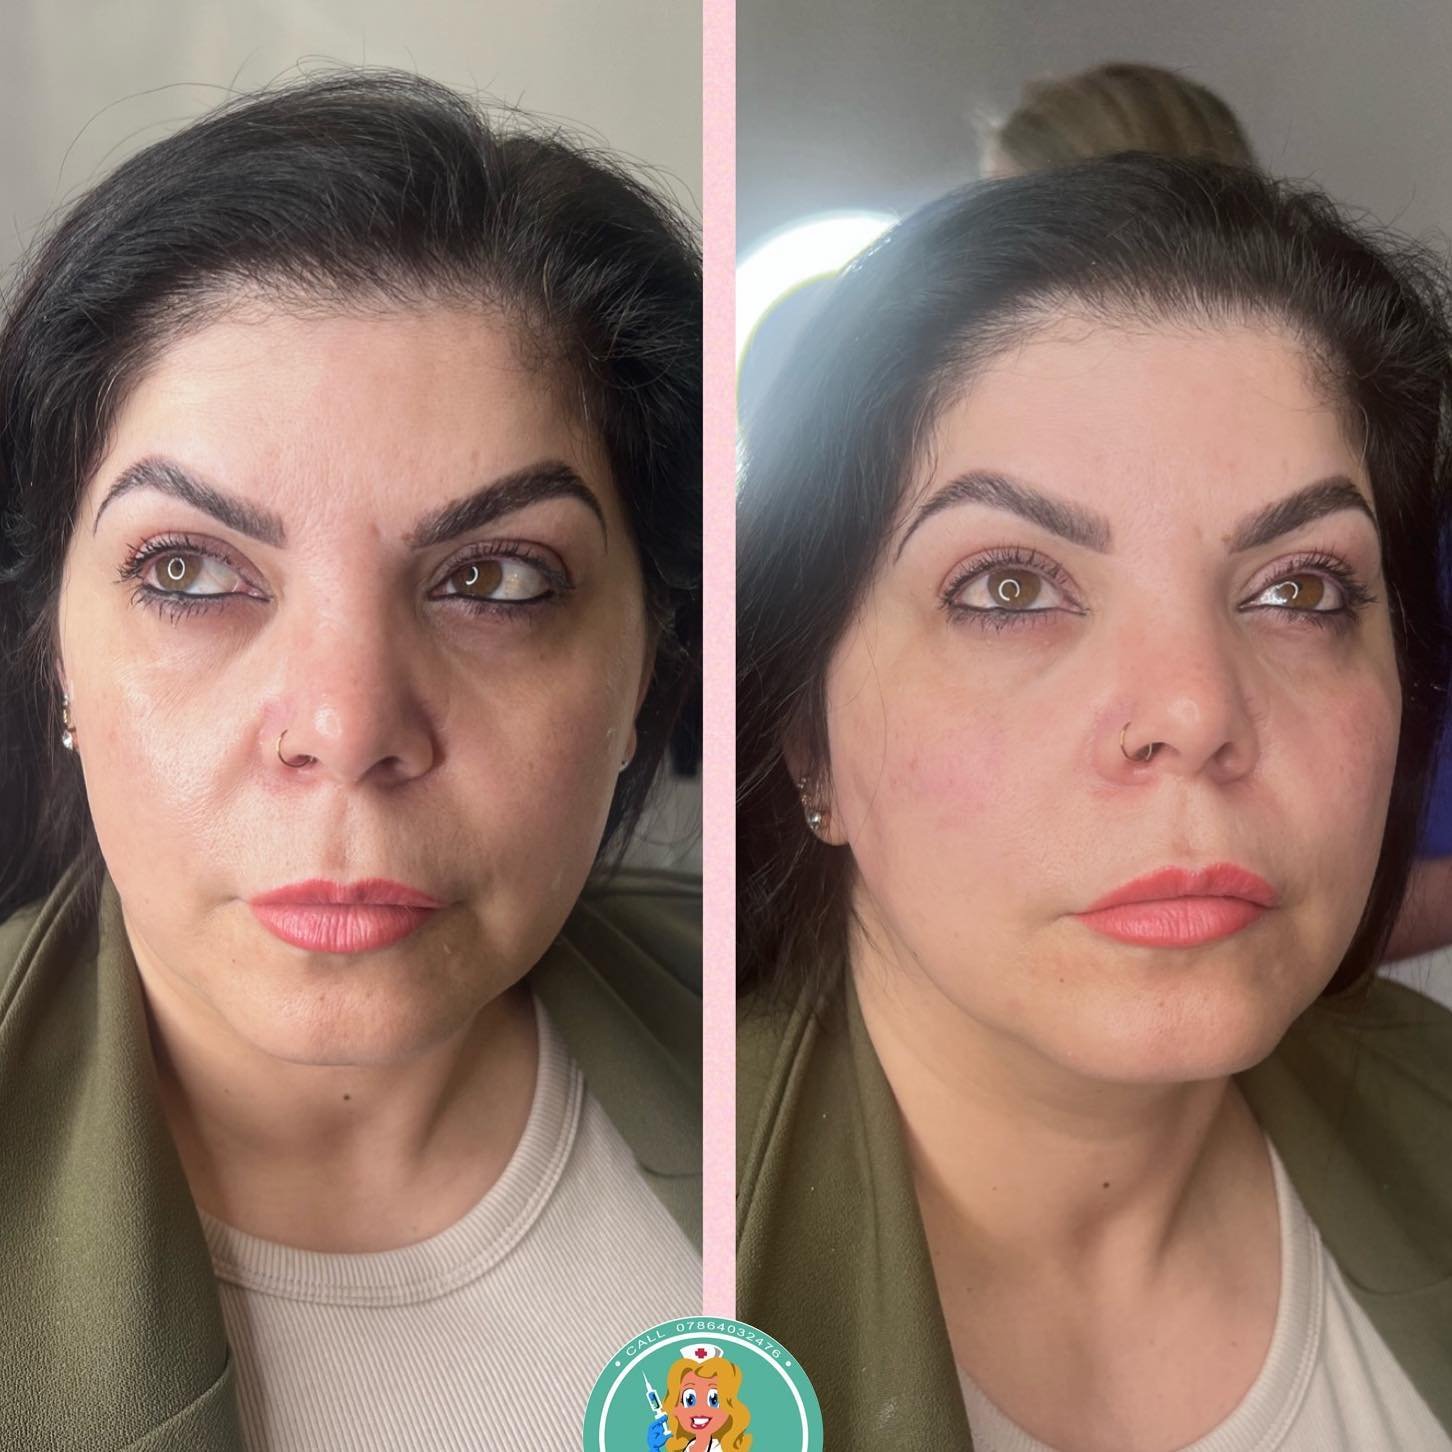 🌱 My gorgeous patient got a lovely refresh ✨🪄 Treating her Mid Face only to reduce hallows, tired eyes and deep folds. 
.
3ml used to create a fresher, less tired appearance 🥰 We are both delighted with the end result 👏 
.
@restylane @michaelhale